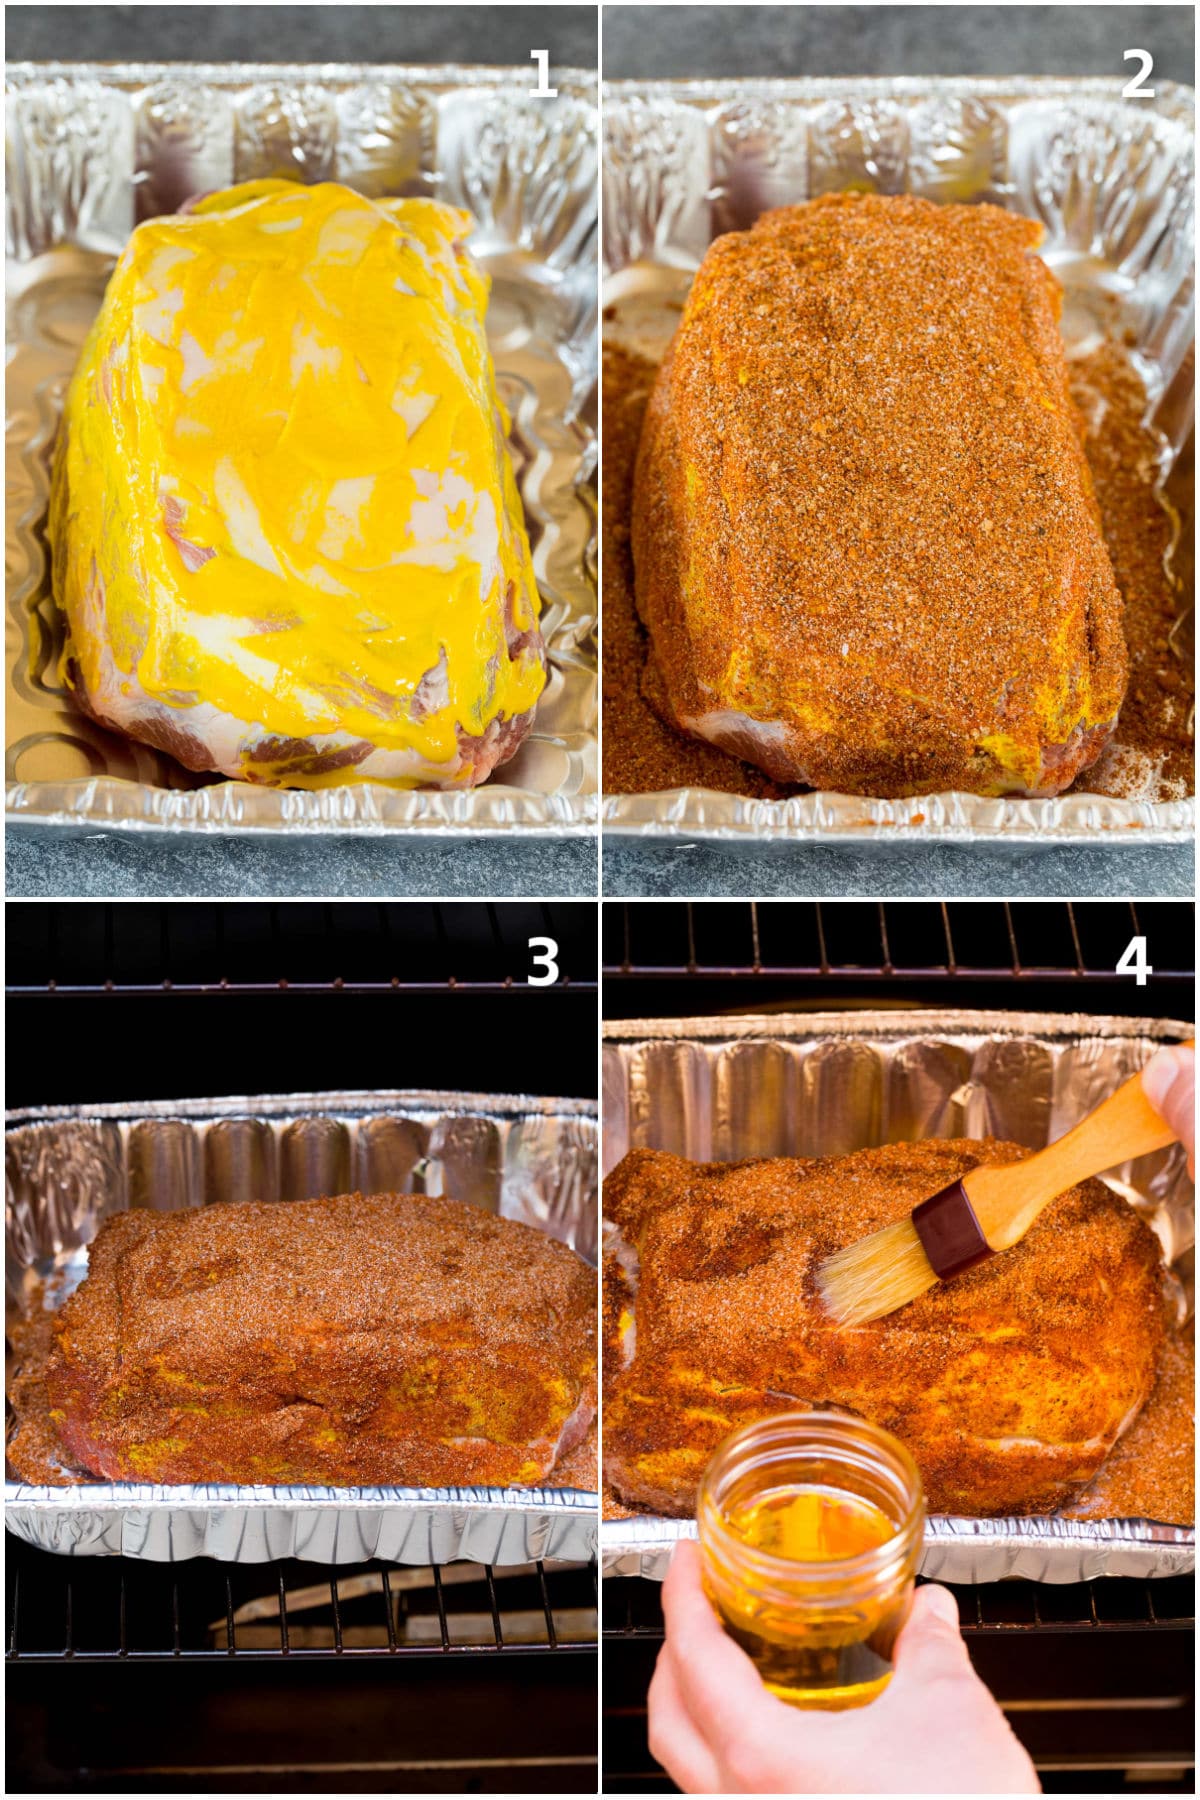 Process shots showing how to coat meat in rub and smoke it.